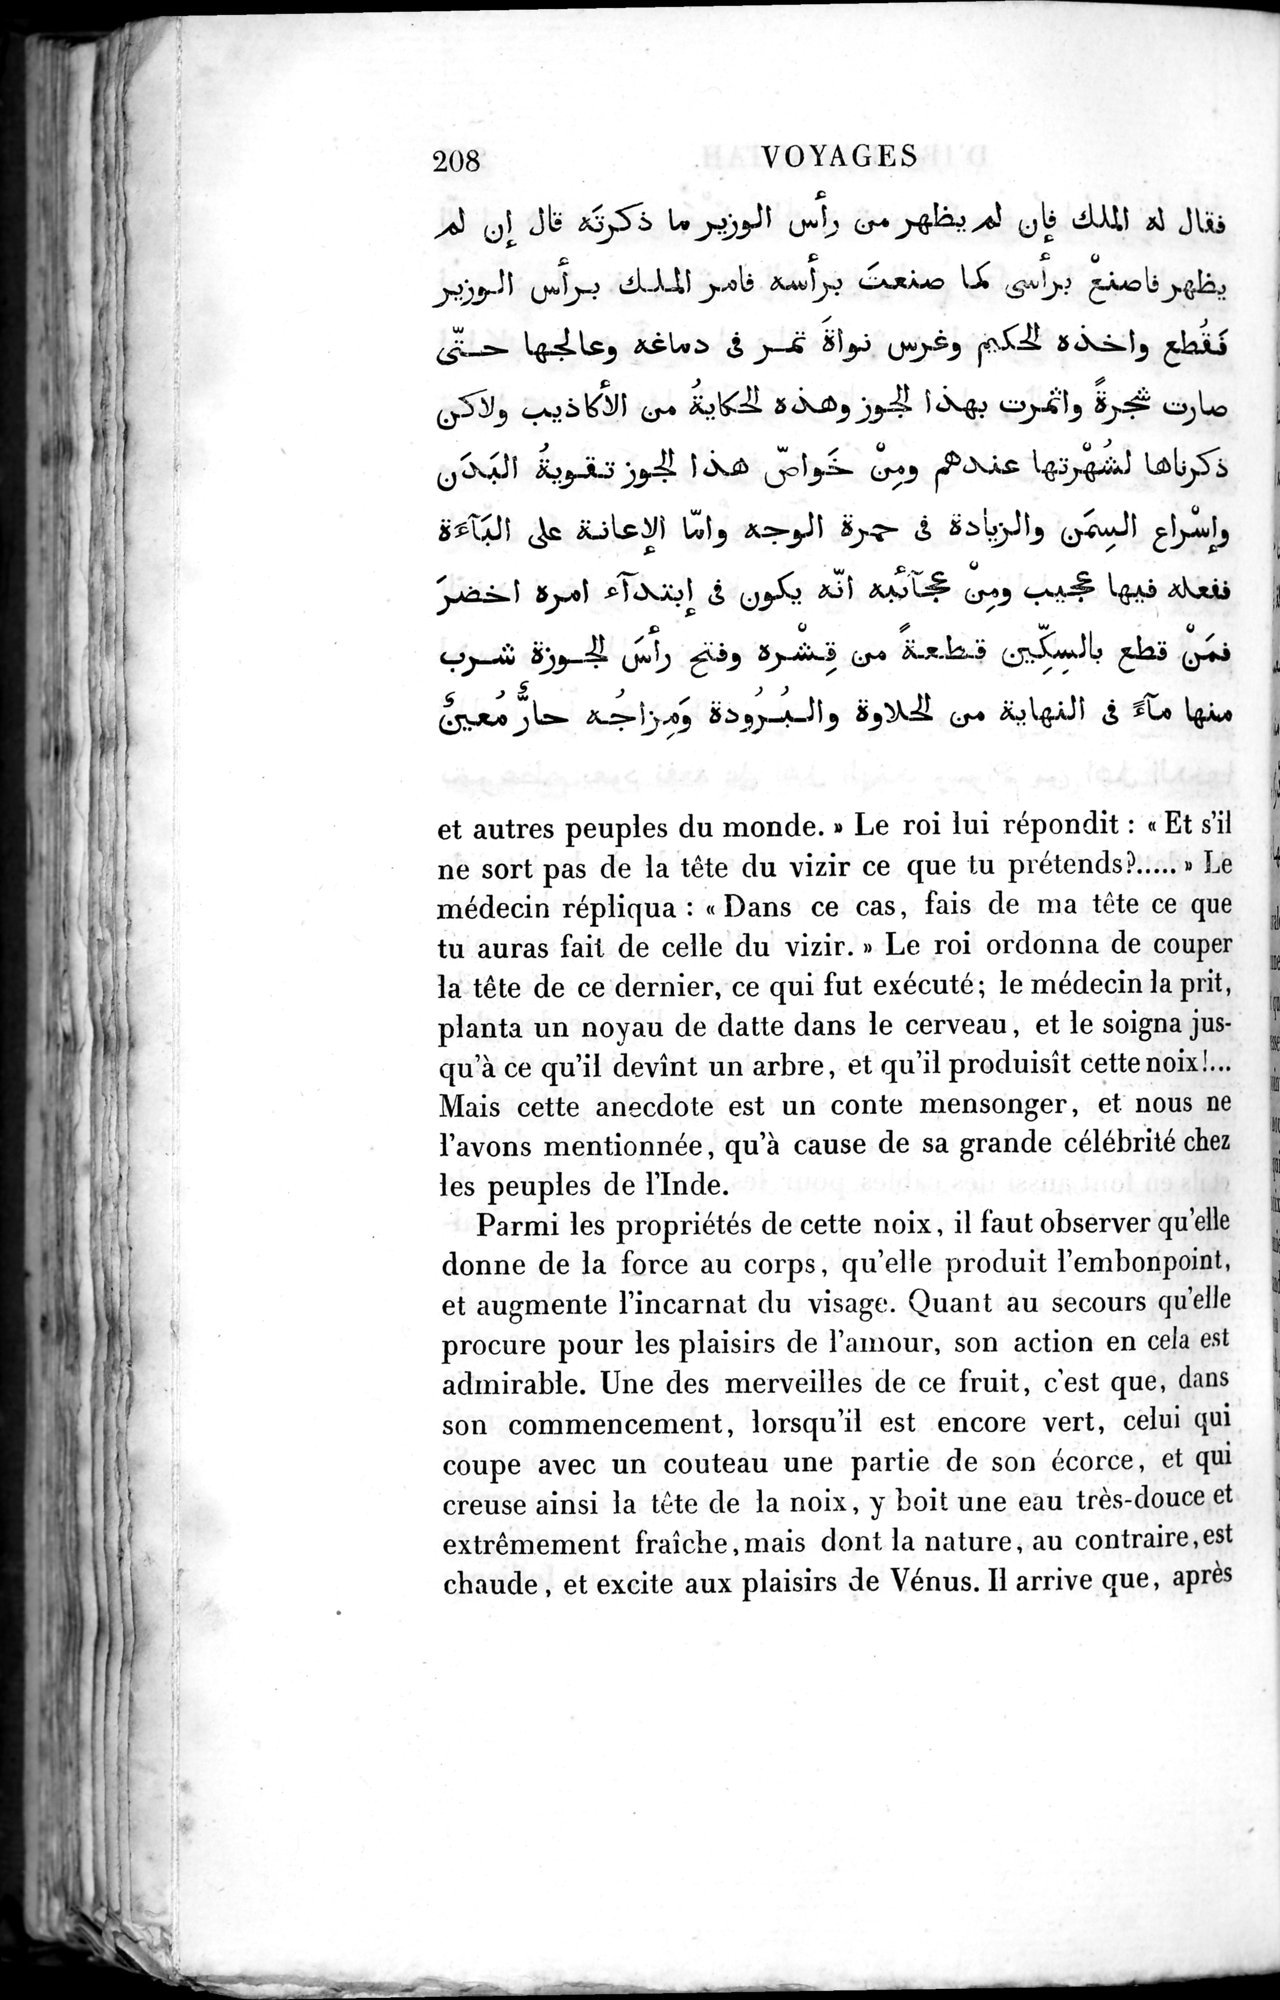 Voyages d'Ibn Batoutah : vol.2 / Page 236 (Grayscale High Resolution Image)